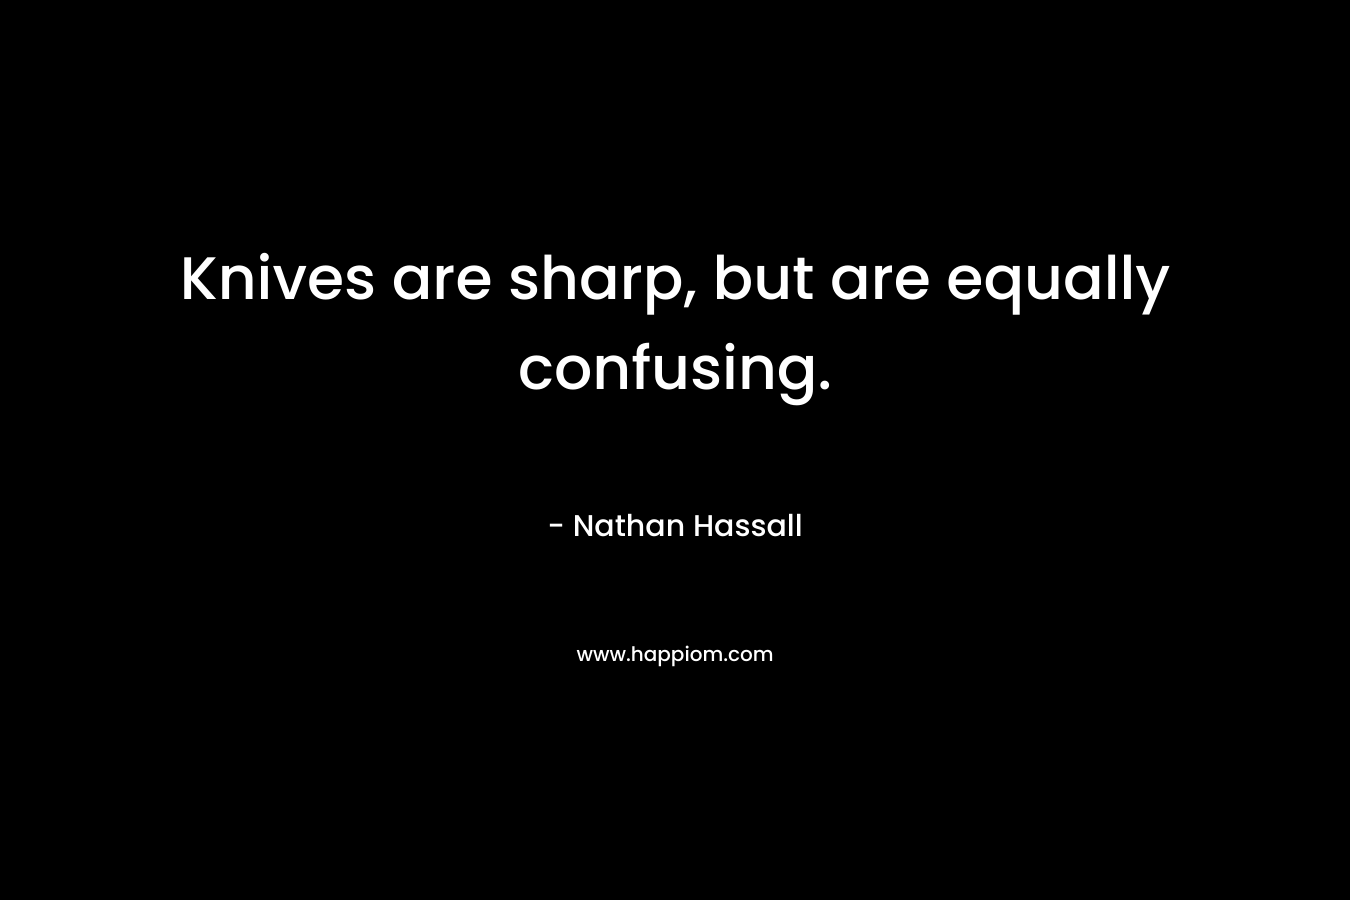 Knives are sharp, but are equally confusing. – Nathan Hassall